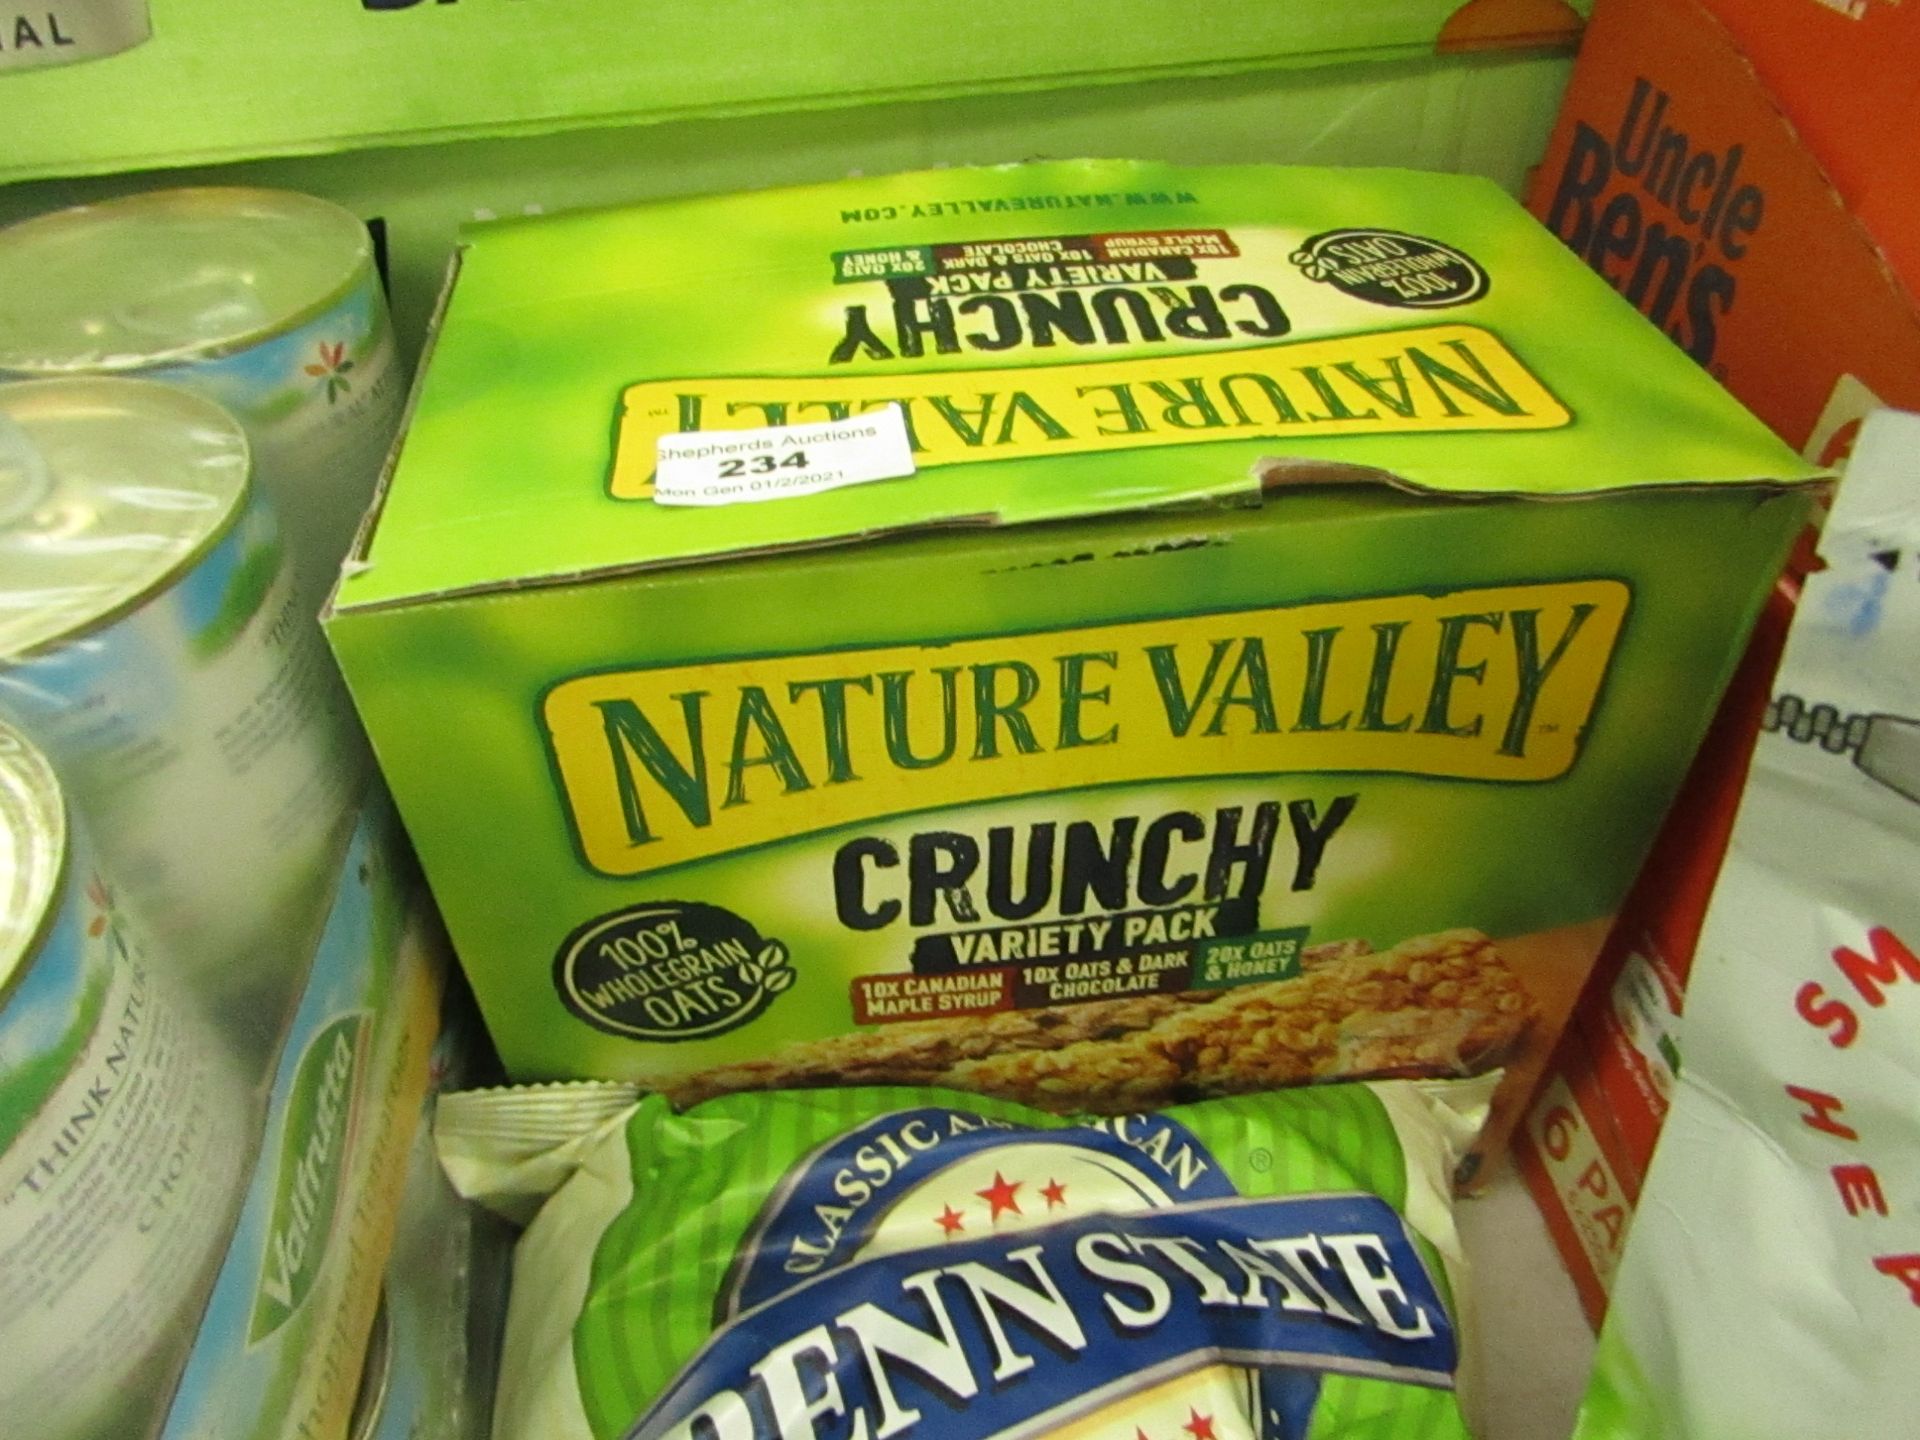 40x 2-Bar Packs of Nature Valley - Crunchy Variety Pack - 10x Canadian Maple Syrup, 10x Oats &